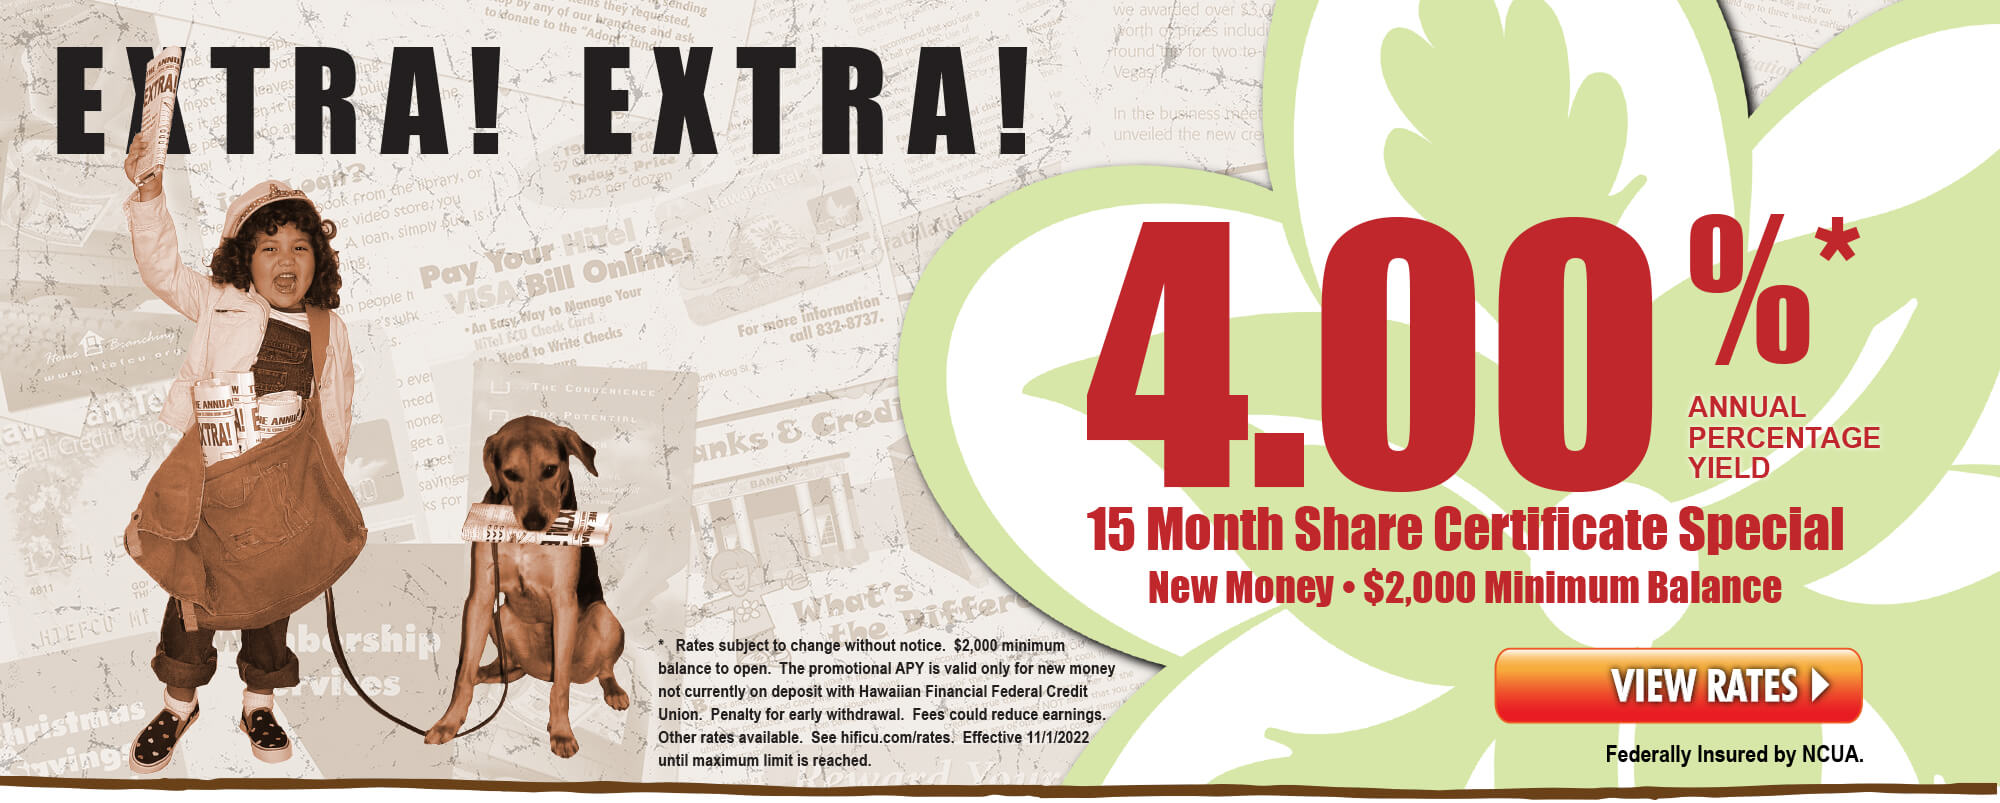 Extra! Extra!  4.00% APY 15 month Share Certificate Special! View Rates